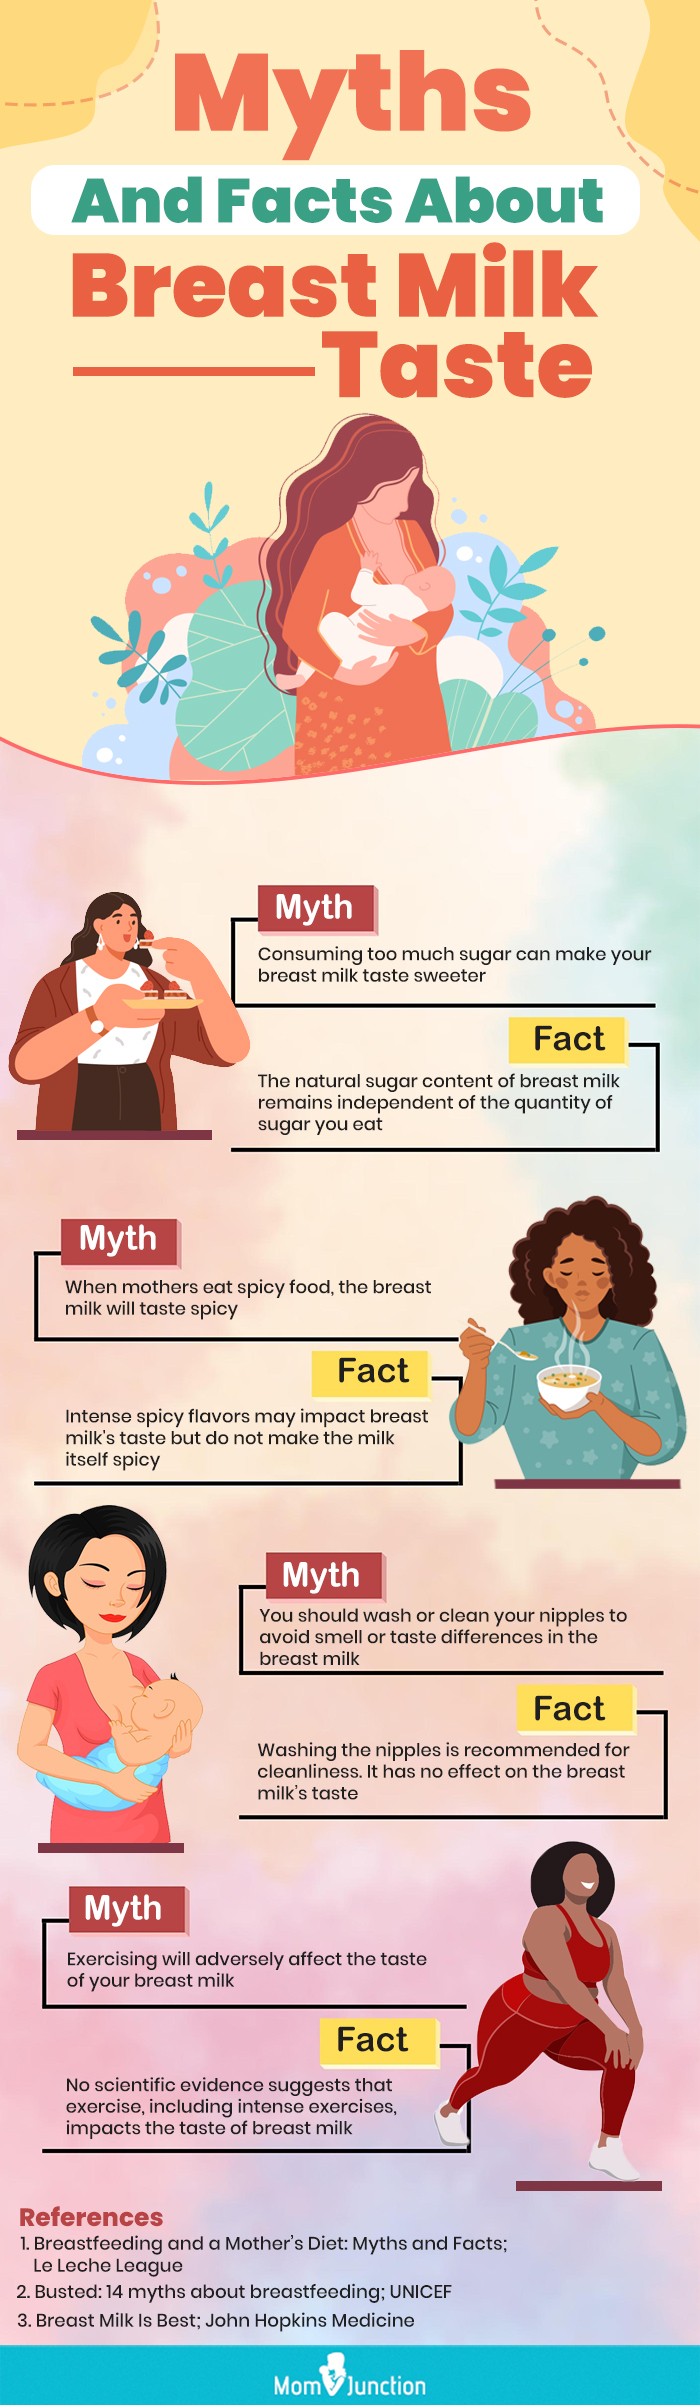 myths and facts about breast milk taste (infographic)